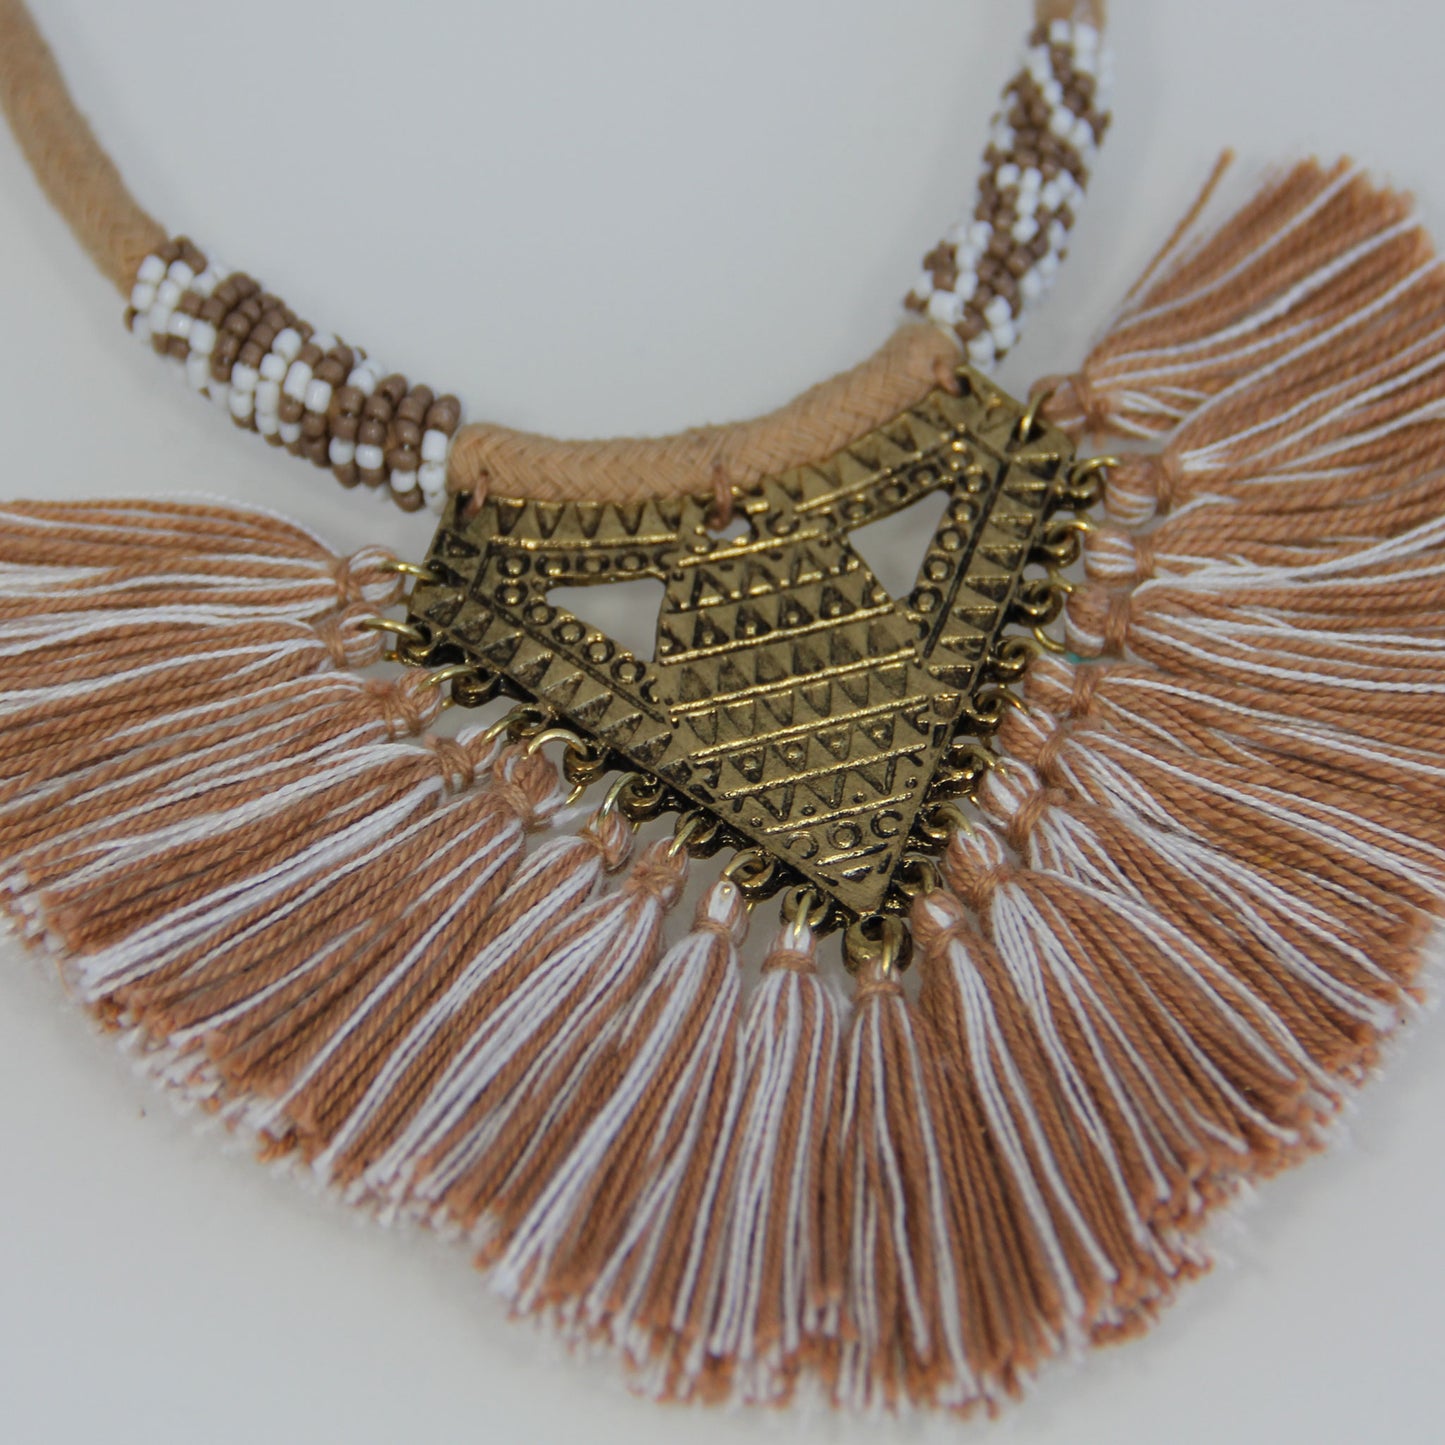 Aztec gold and cord necklace